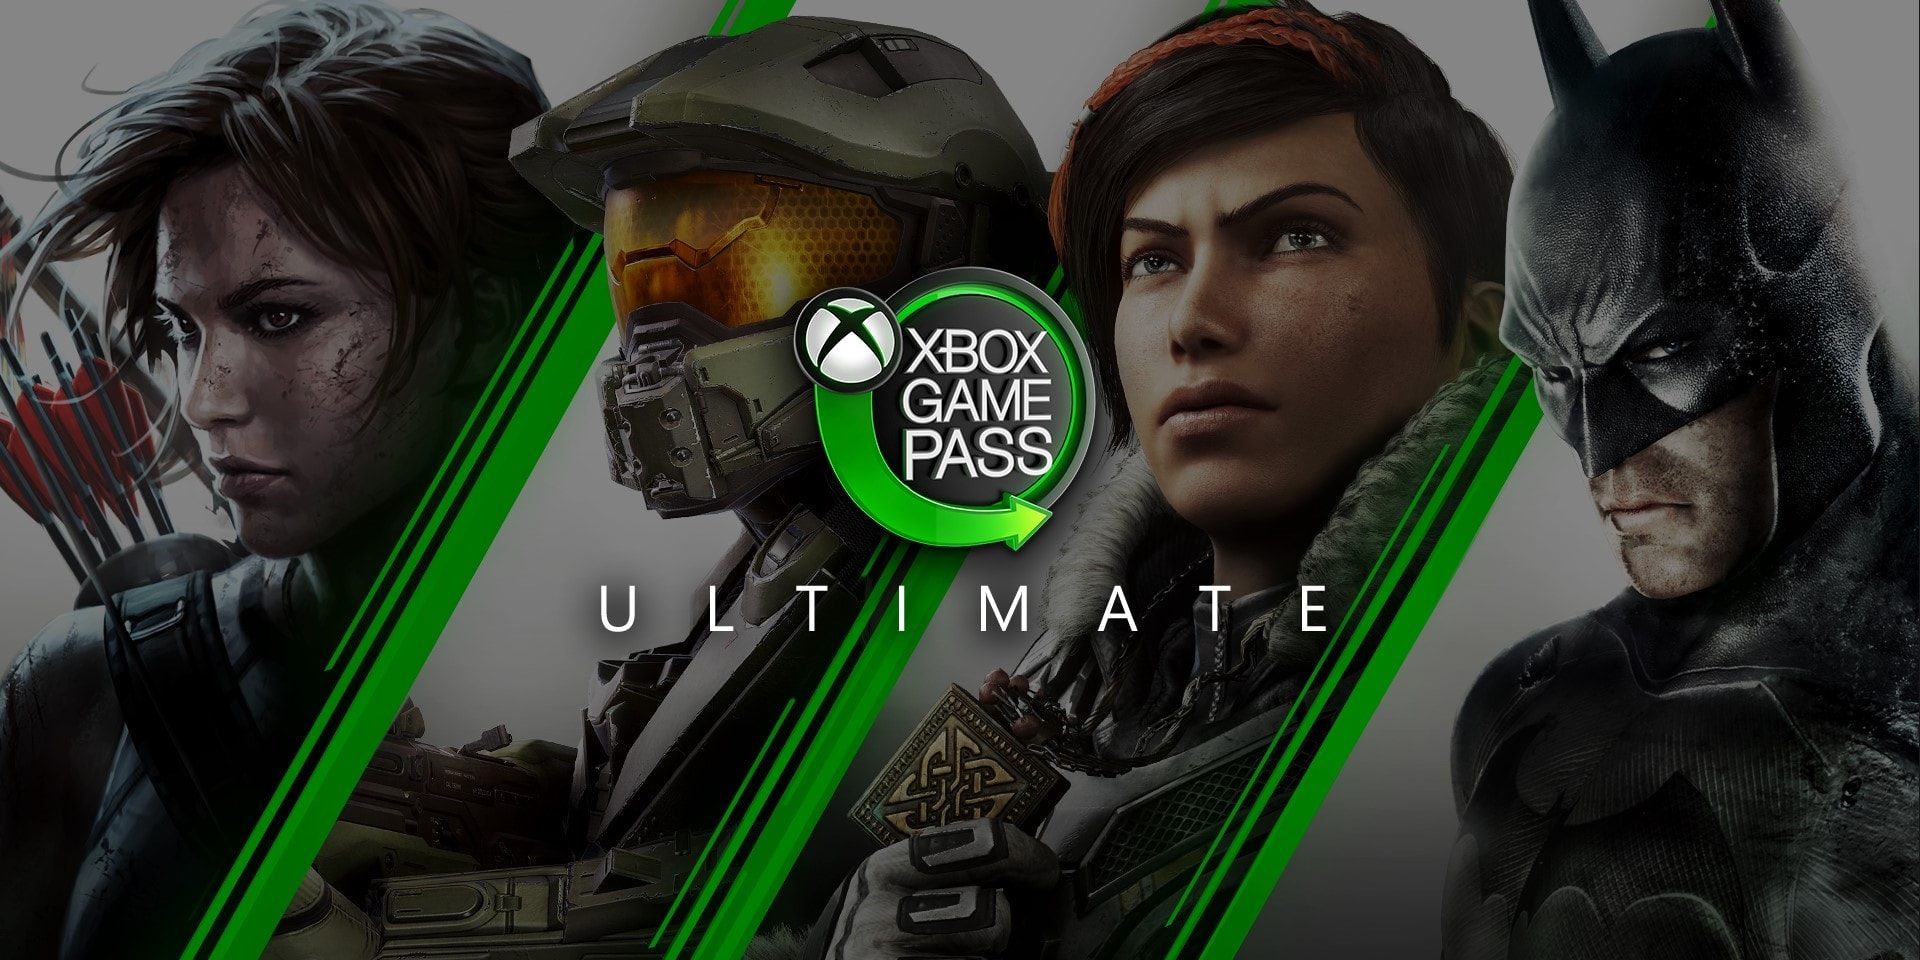 Xbox Game Pass Black Friday deals now live from $20: 3-month